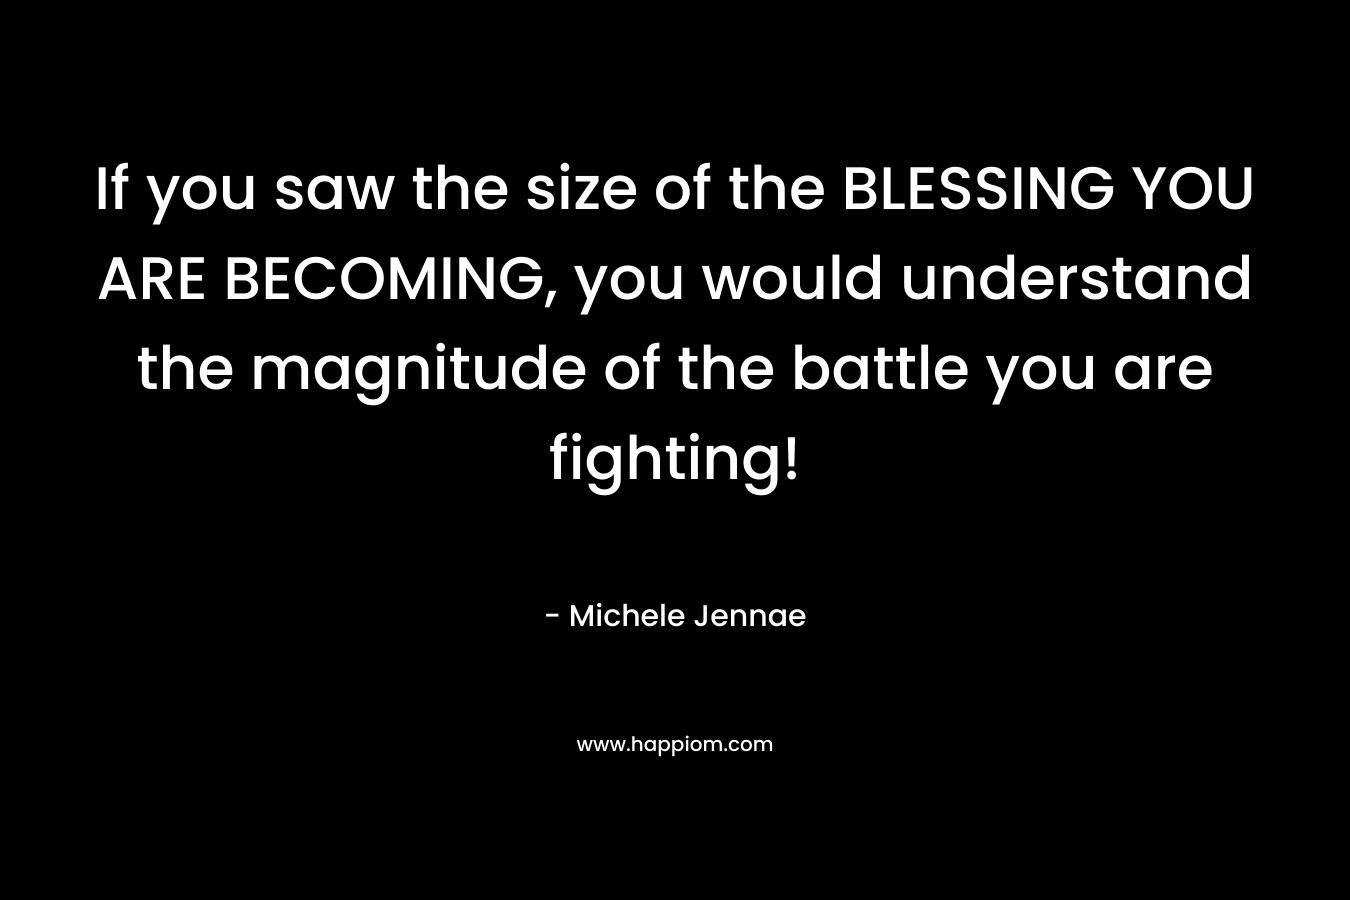 If you saw the size of the BLESSING YOU ARE BECOMING, you would understand the magnitude of the battle you are fighting! – Michele Jennae